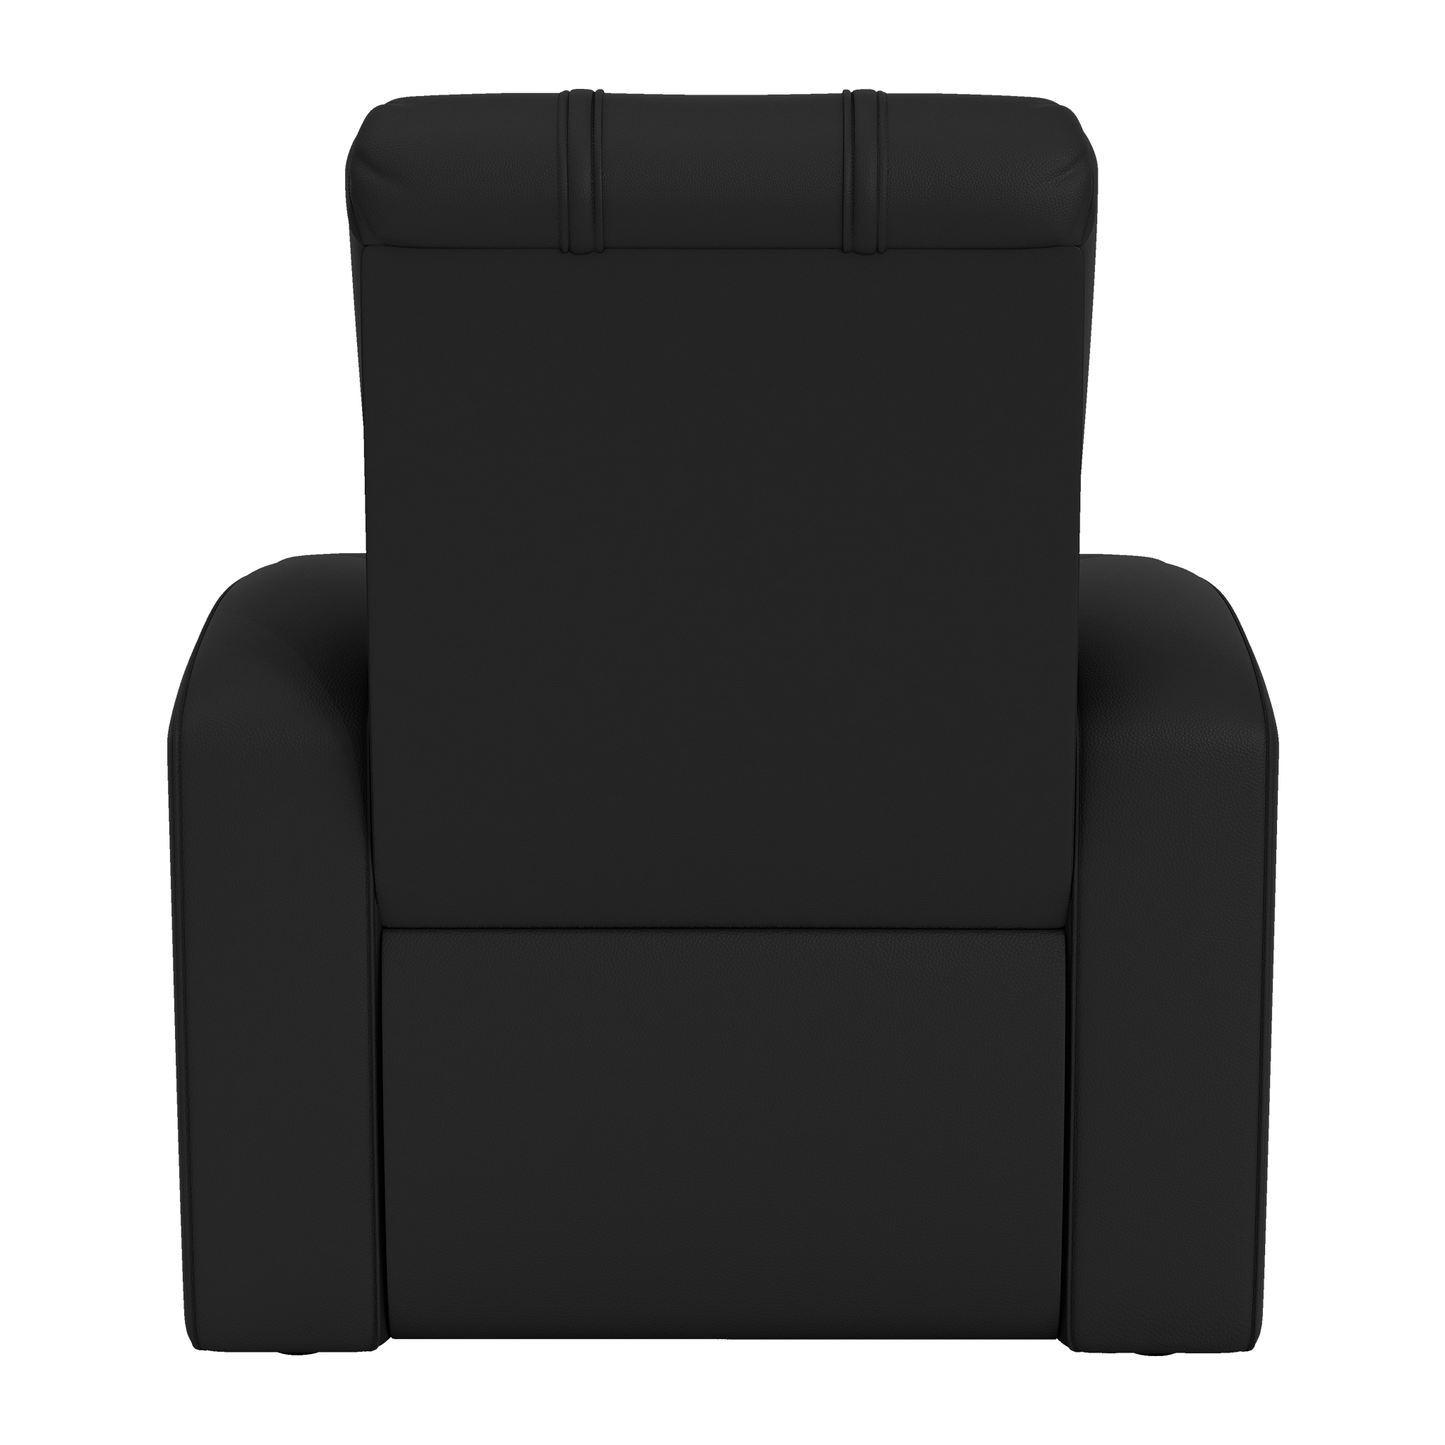 Relax Home Theater Recliner with UNC Wilmington Secondary Logo